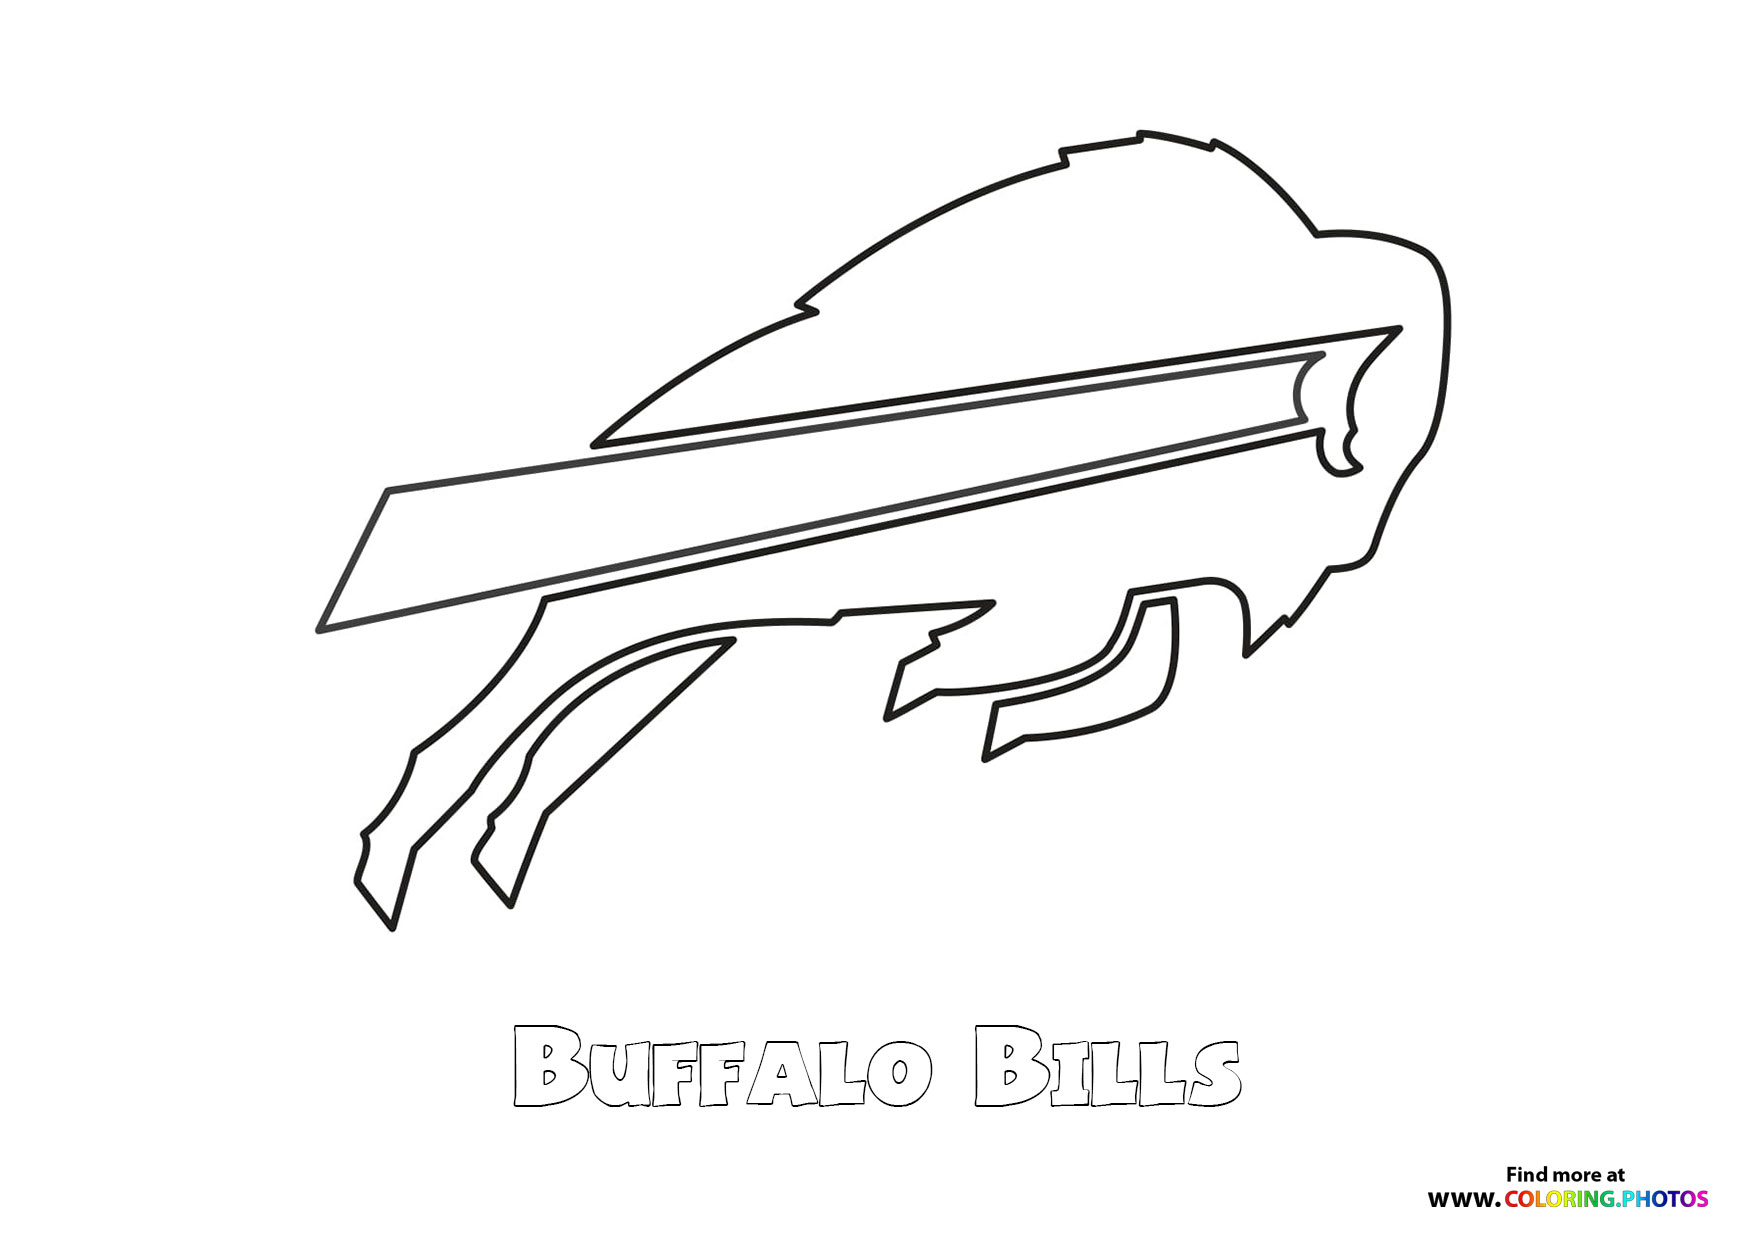 Buffalo Bills NFL logo - Coloring Pages for kids